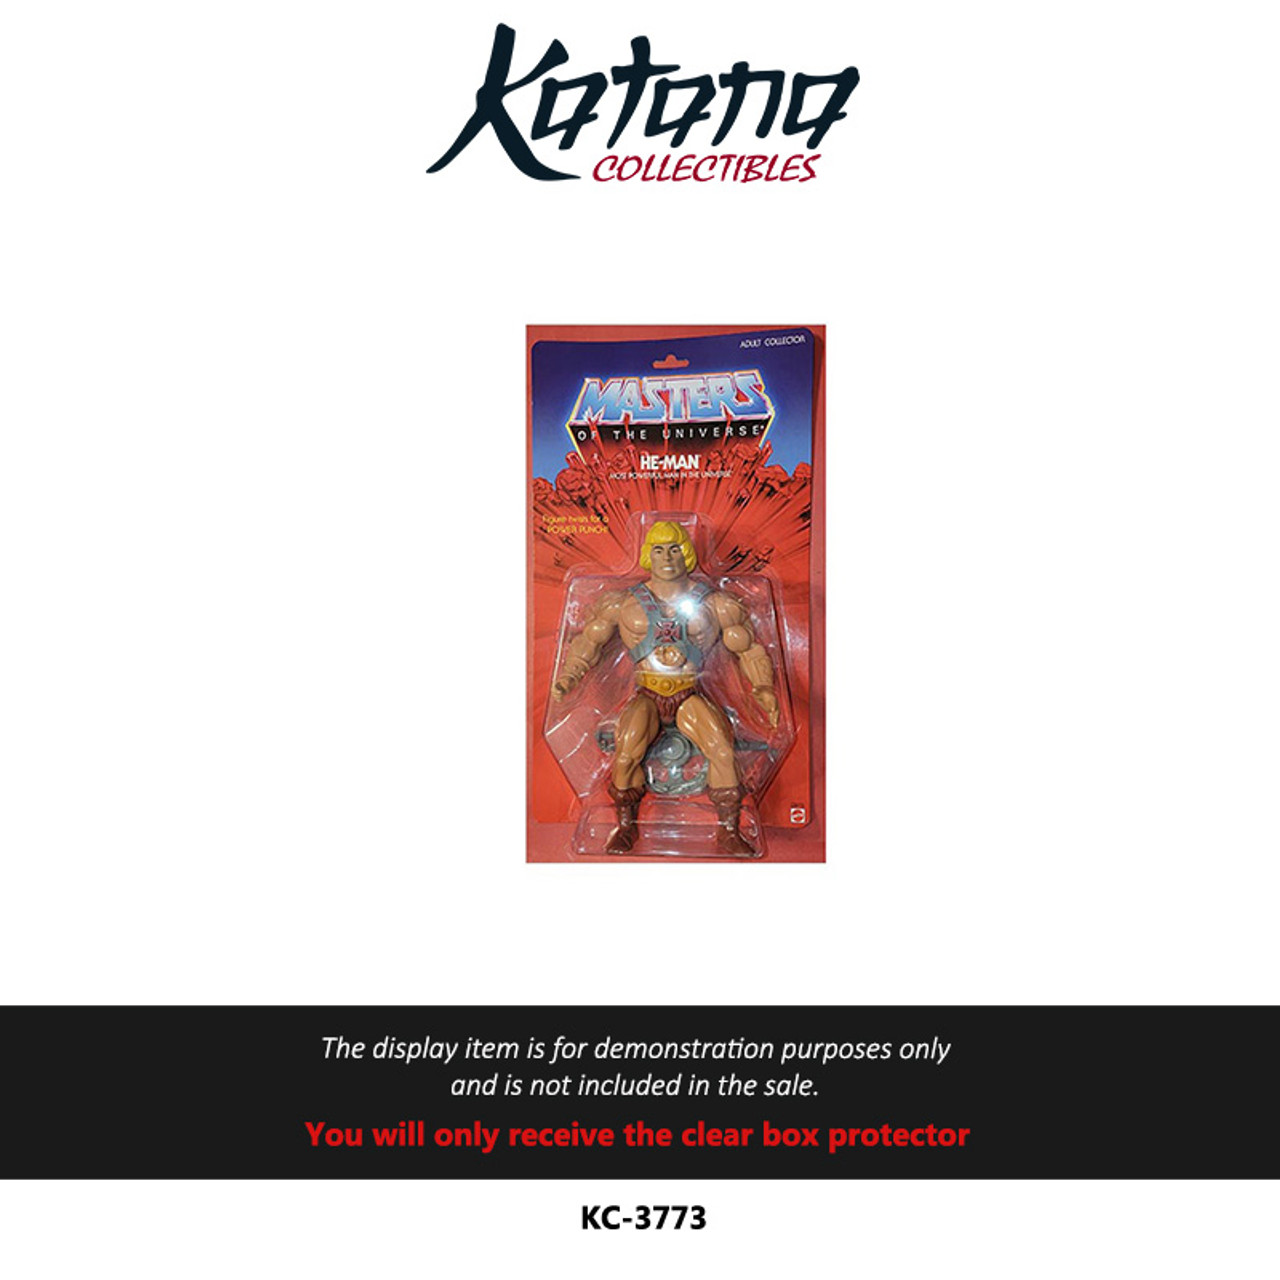 Katana Collectibles Protector For Masters of the Universe Giant He-Man